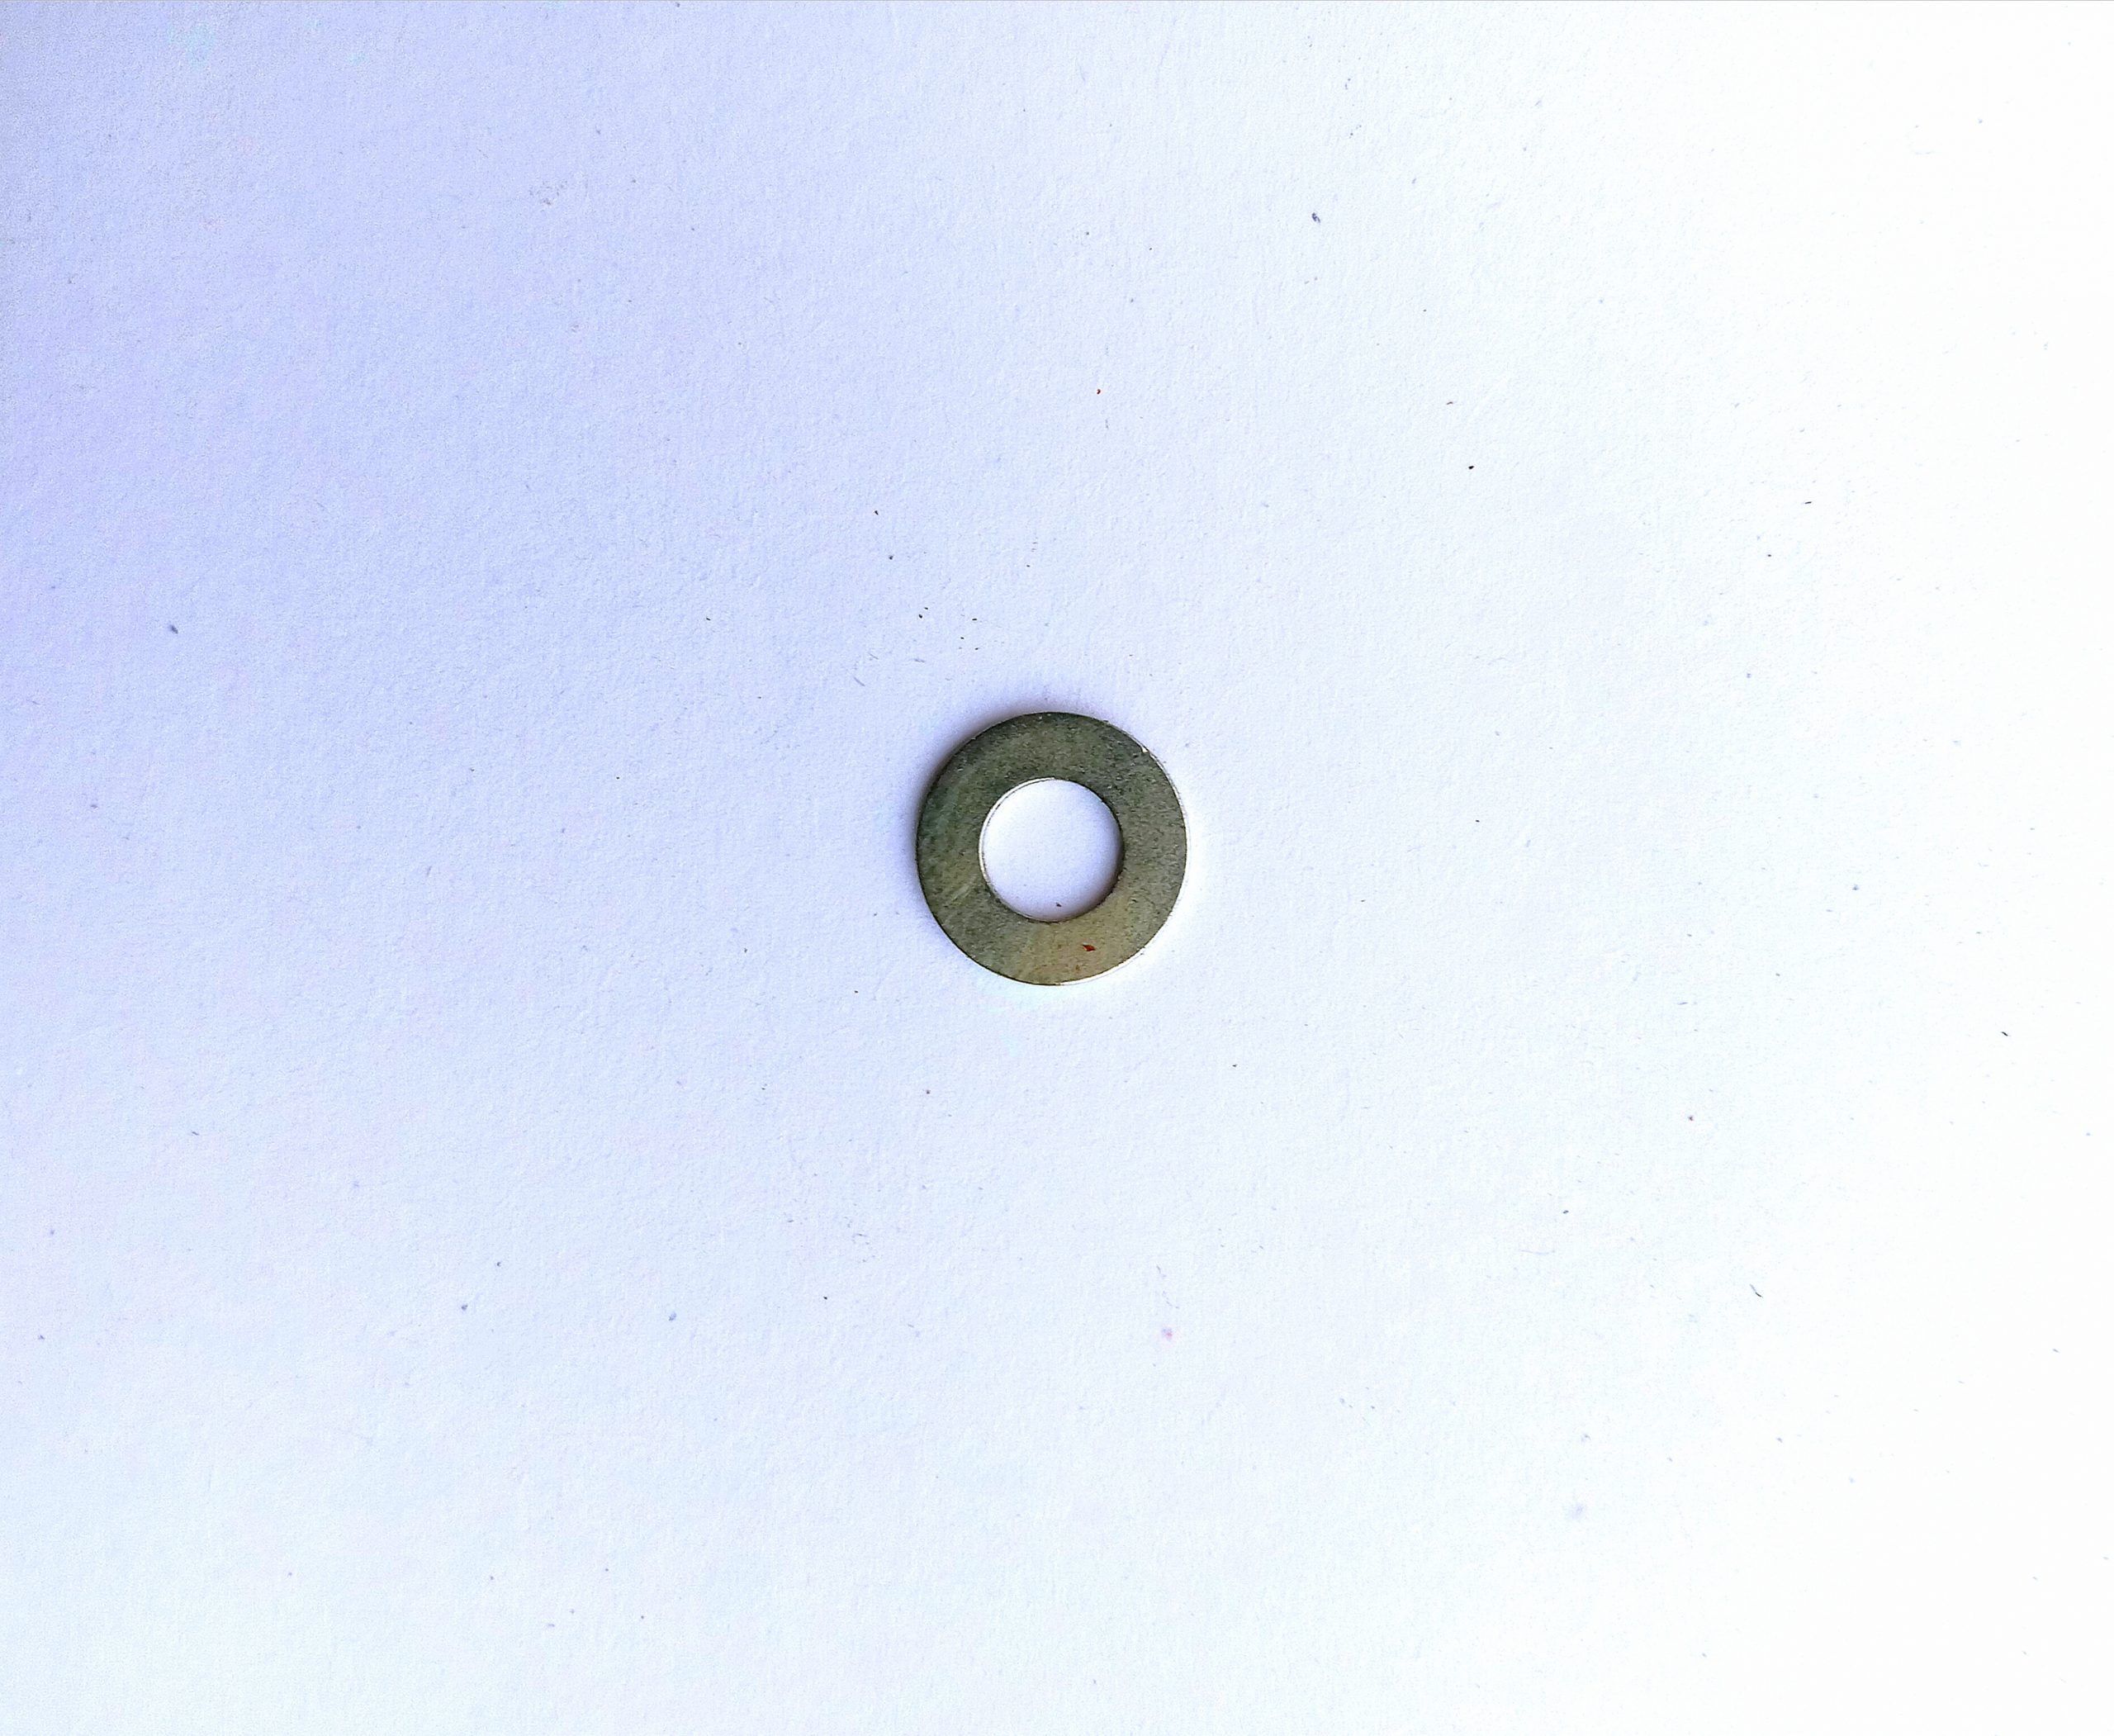 A washer ring